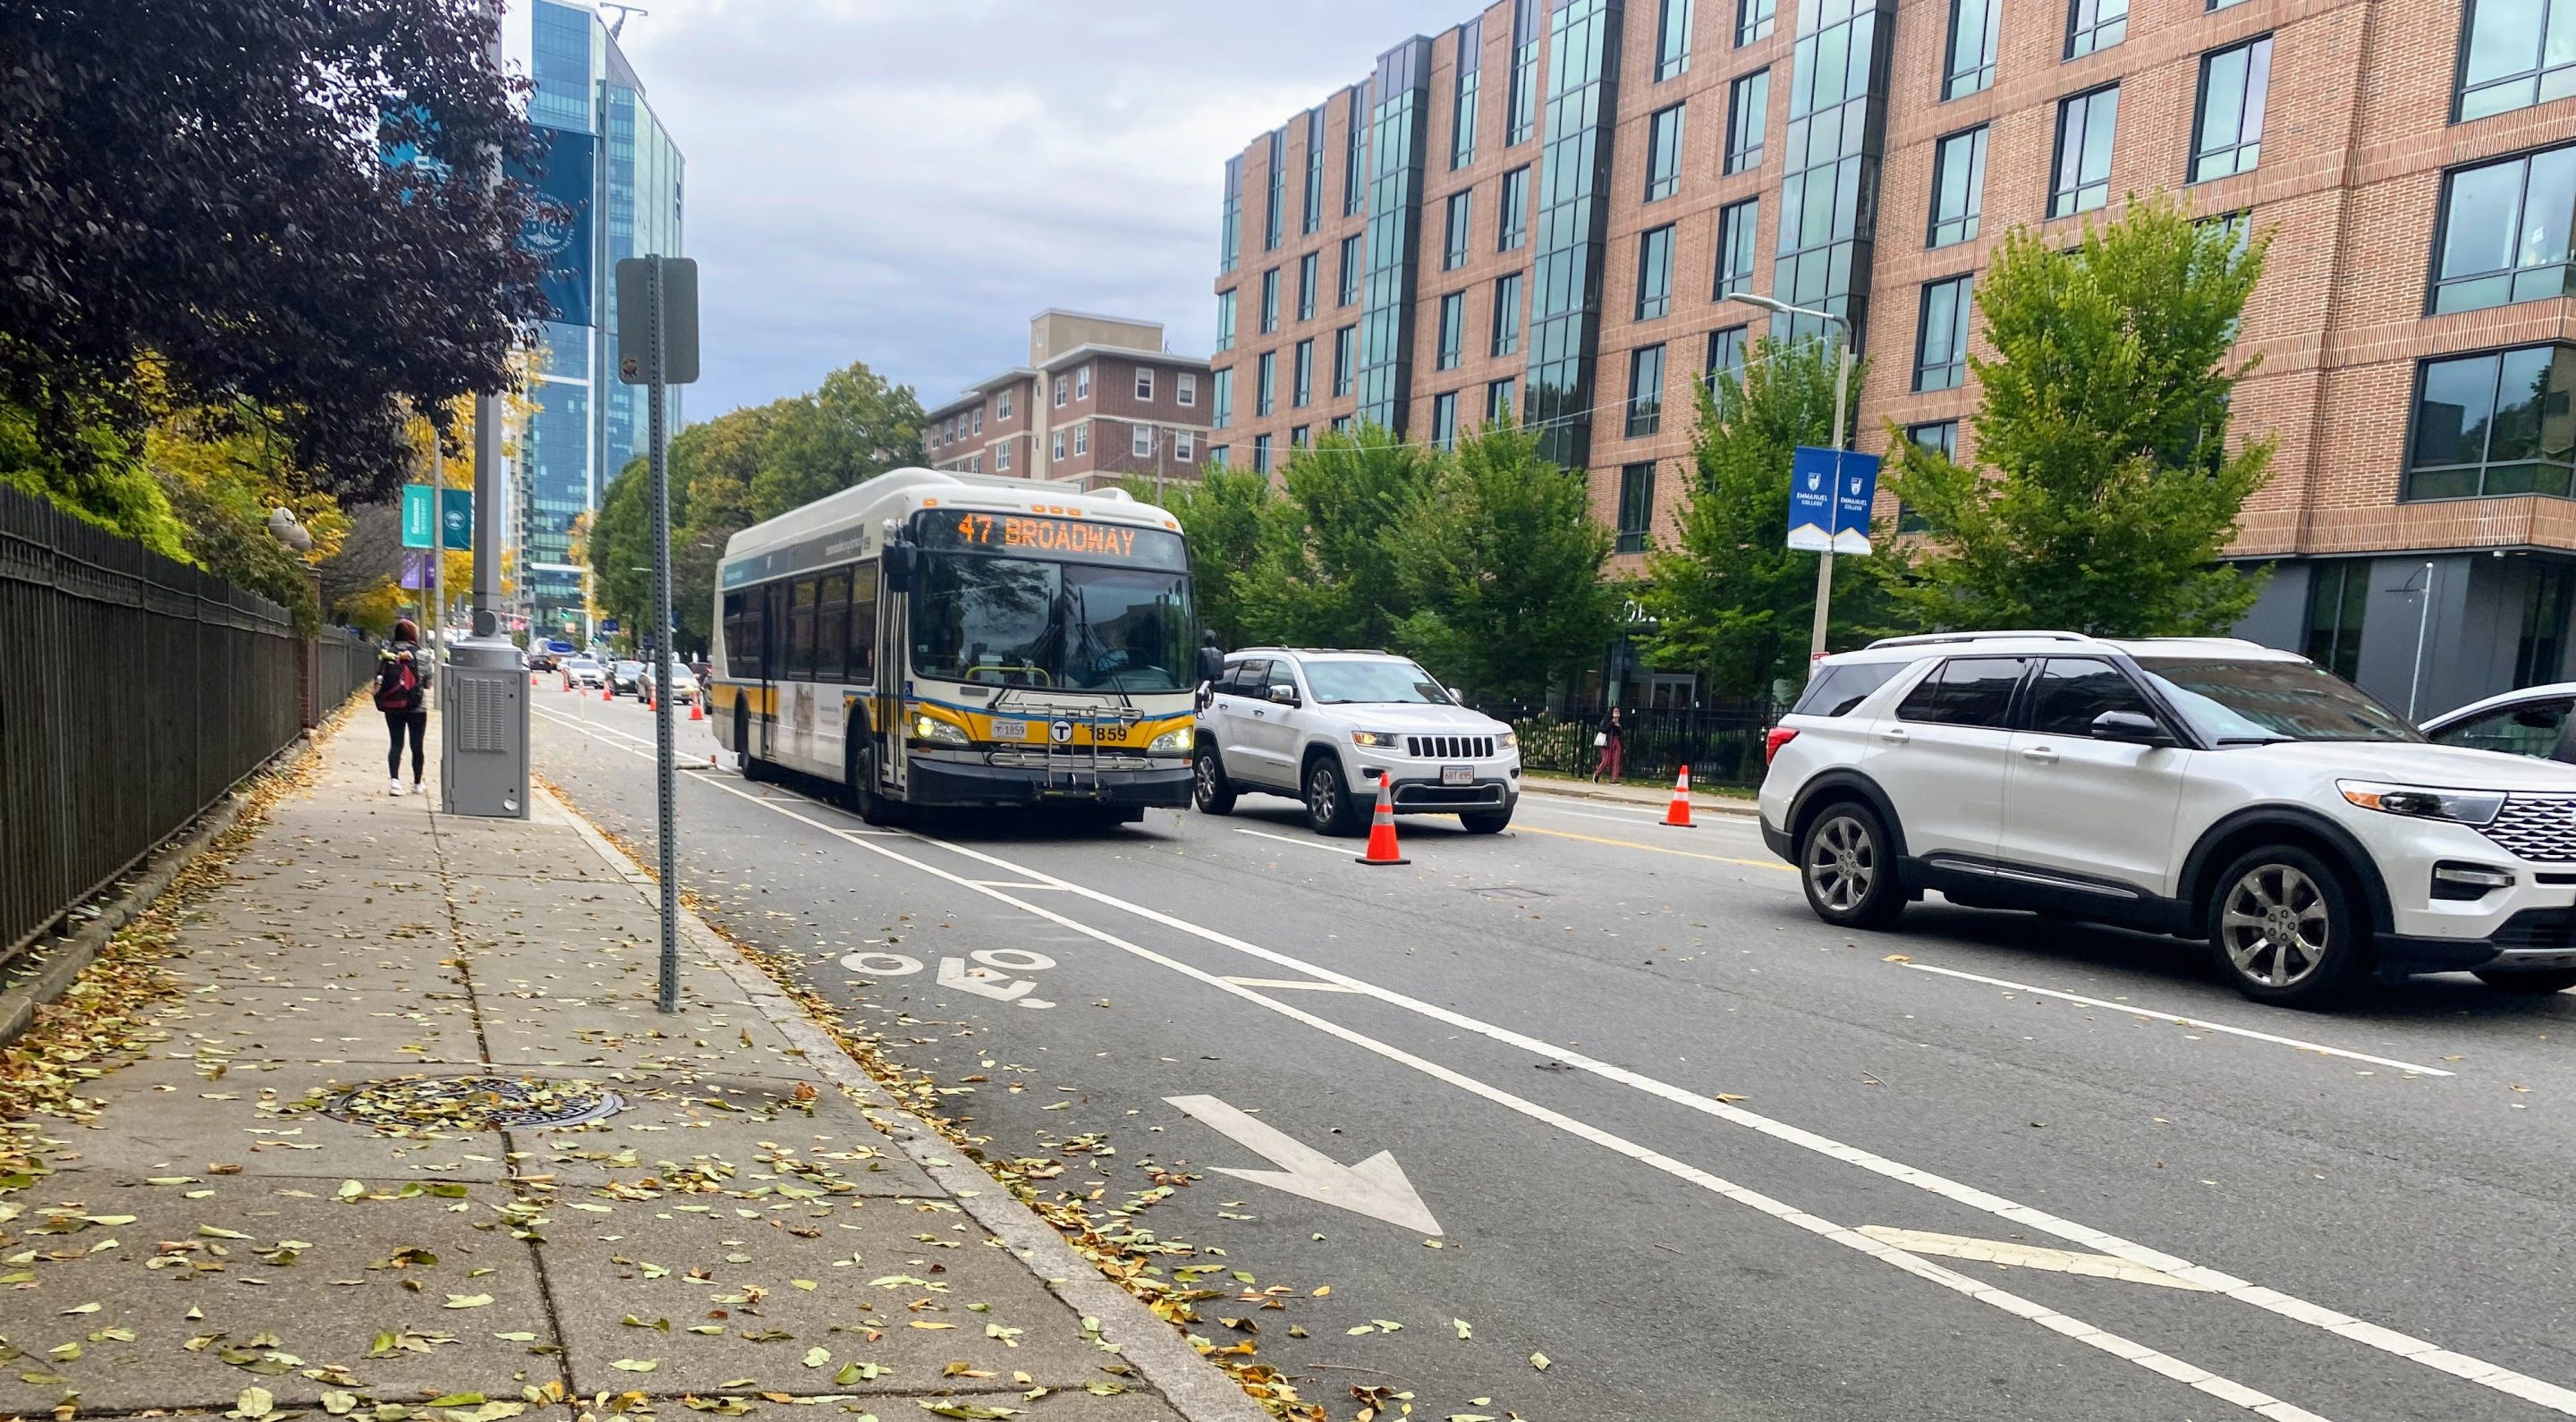 A black-and-yellow MBTA route 47 bus drives in an empty lane delineated by a row of cones from an adjacent car lane where multiple cars and SUVs are stuck in traffic. To the left of the bus, along the curb, is a bicycle lane.